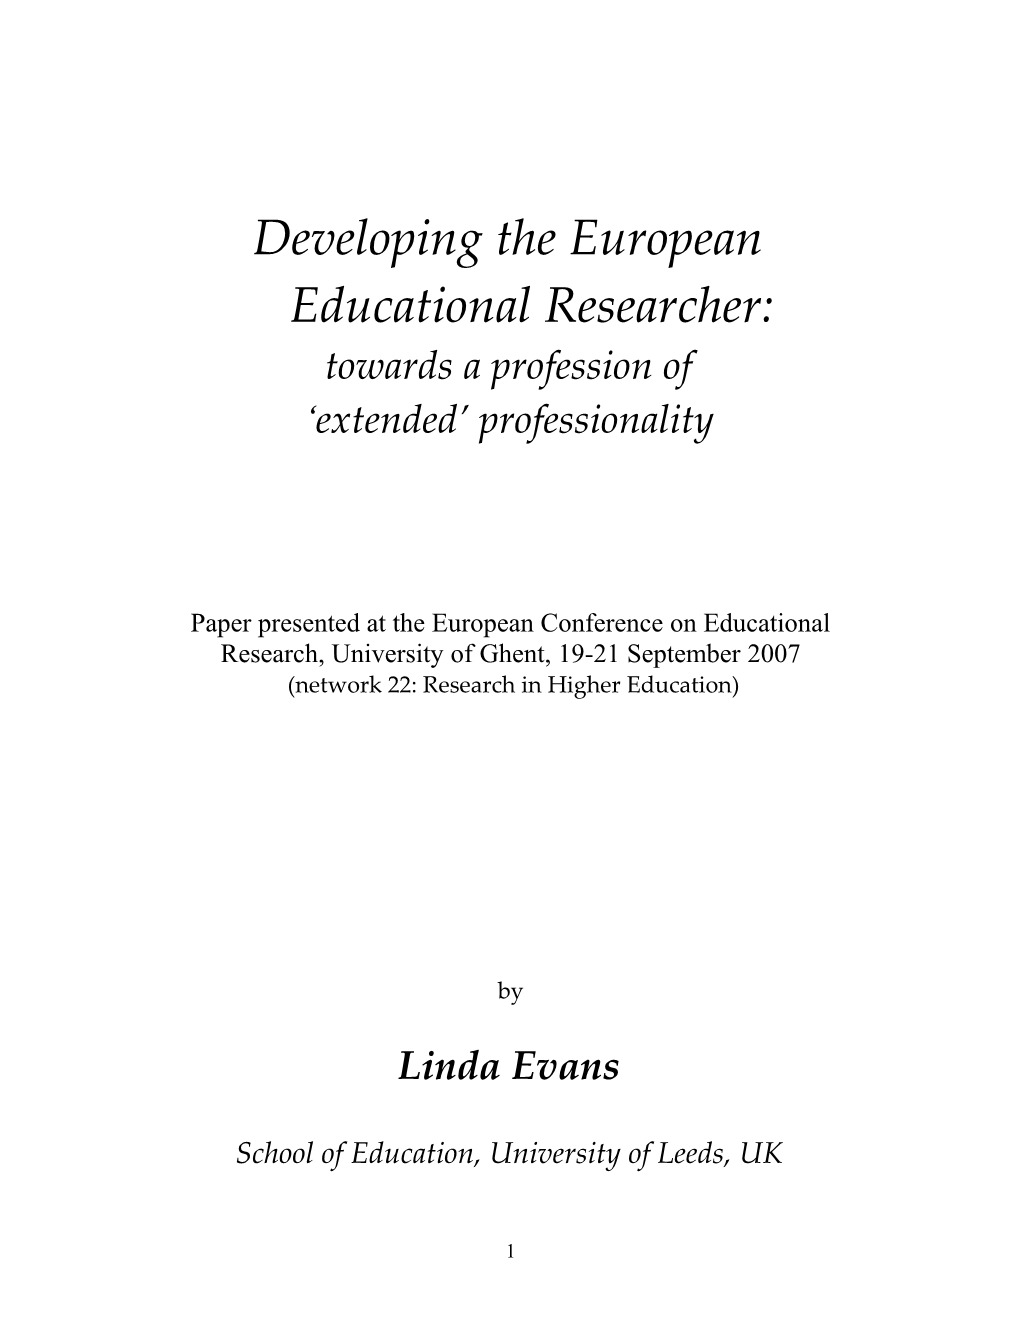 Developing the European Educational Researcher: Towards a Profession of Extended Professionality